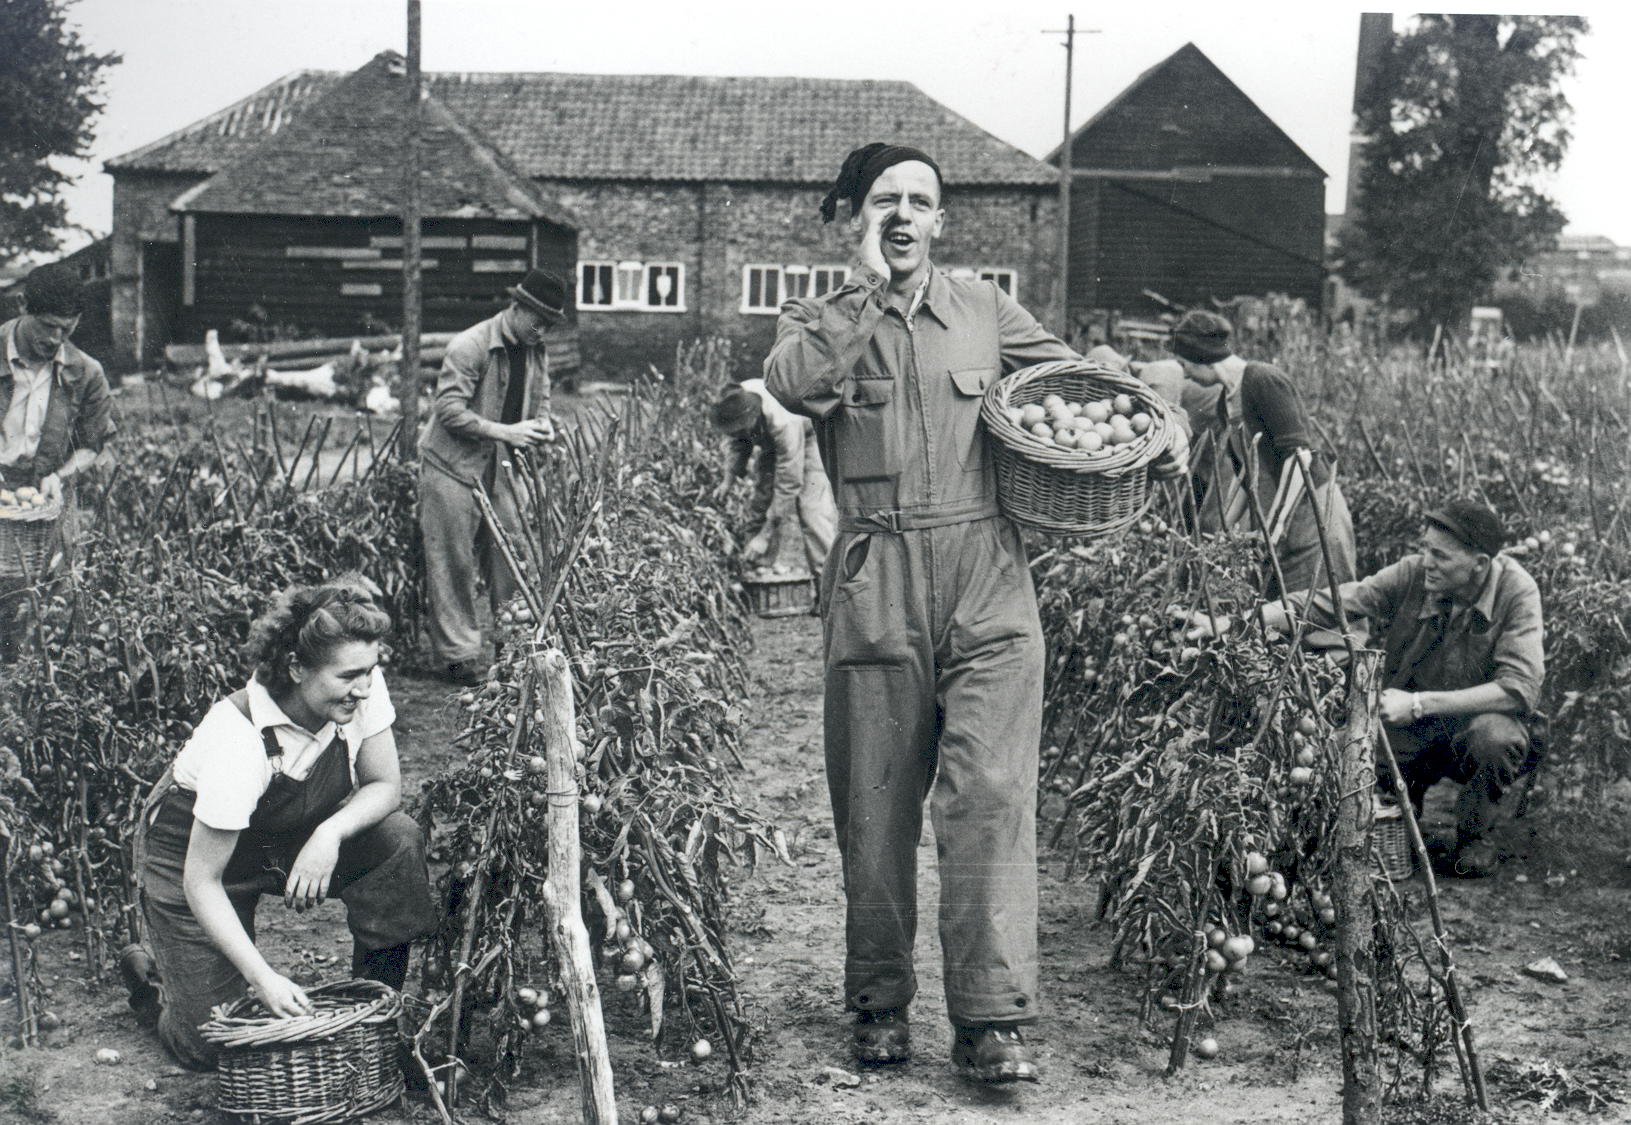 Prisoners of war and land army women harvesting tomatoes at Rivernook Farm, Walton, 1946.